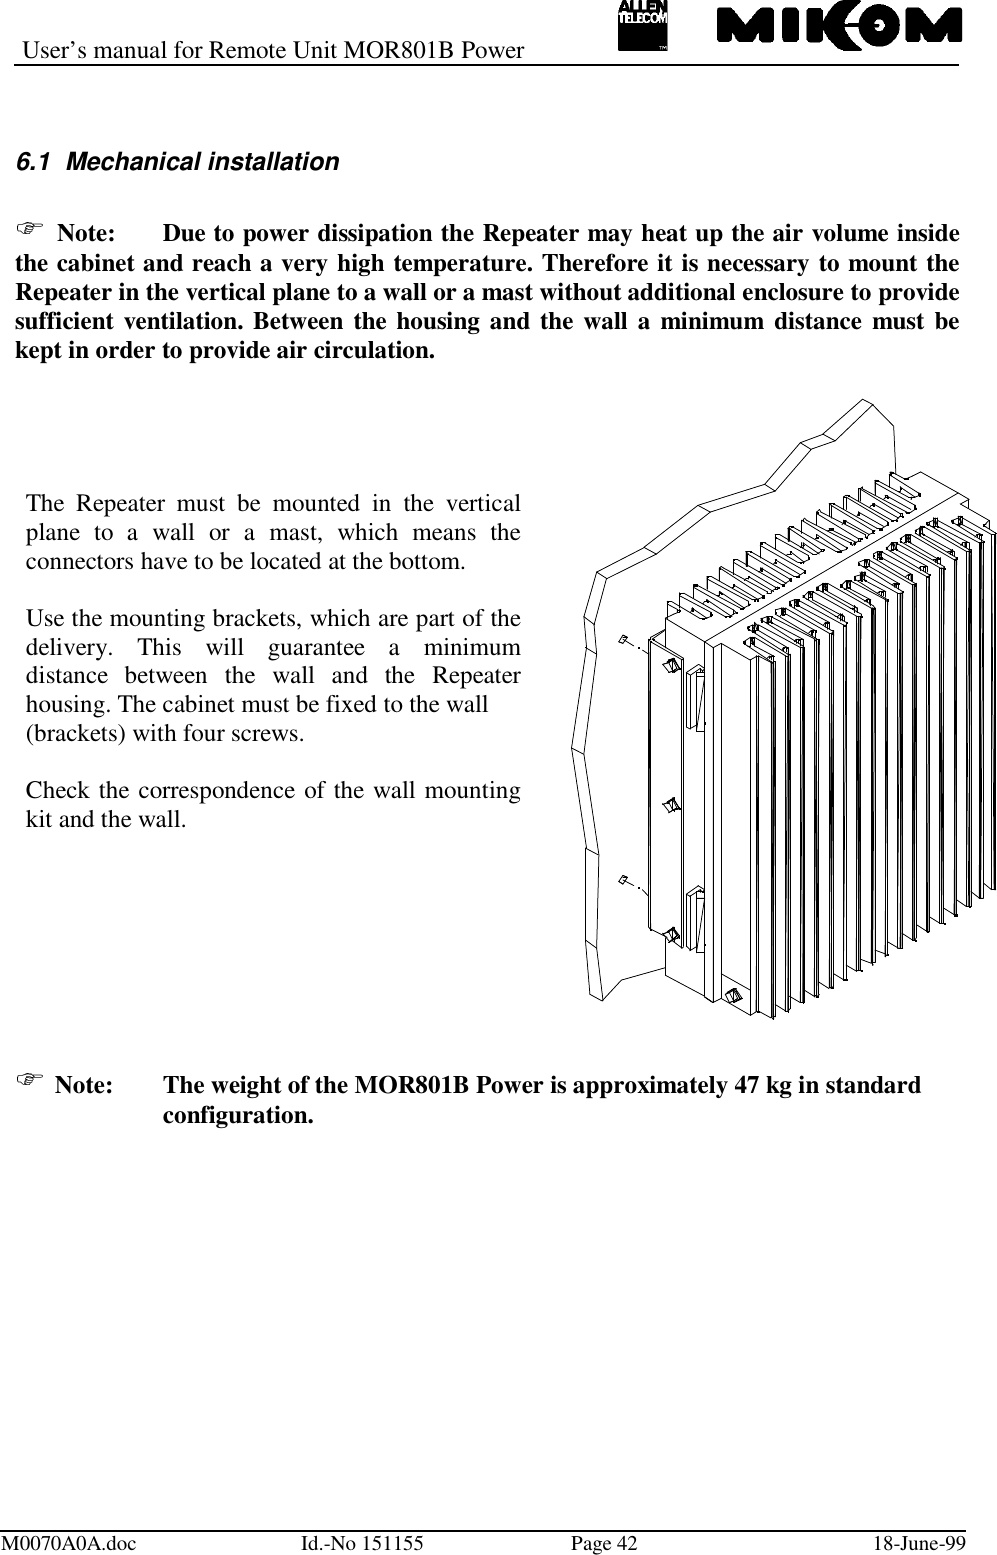 User’s manual for Remote Unit MOR801B PowerM0070A0A.doc Id.-No 151155 Page 42 18-June-996.1  Mechanical installation Note: Due to power dissipation the Repeater may heat up the air volume insidethe cabinet and reach a very high temperature. Therefore it is necessary to mount theRepeater in the vertical plane to a wall or a mast without additional enclosure to providesufficient ventilation. Between the housing and the wall a minimum distance must bekept in order to provide air circulation. Note: The weight of the MOR801B Power is approximately 47 kg in standardconfiguration.The Repeater must be mounted in the verticalplane to a wall or a mast, which means theconnectors have to be located at the bottom.Use the mounting brackets, which are part of thedelivery. This will guarantee a minimumdistance between the wall and the Repeaterhousing. The cabinet must be fixed to the wall(brackets) with four screws.Check the correspondence of the wall mountingkit and the wall.